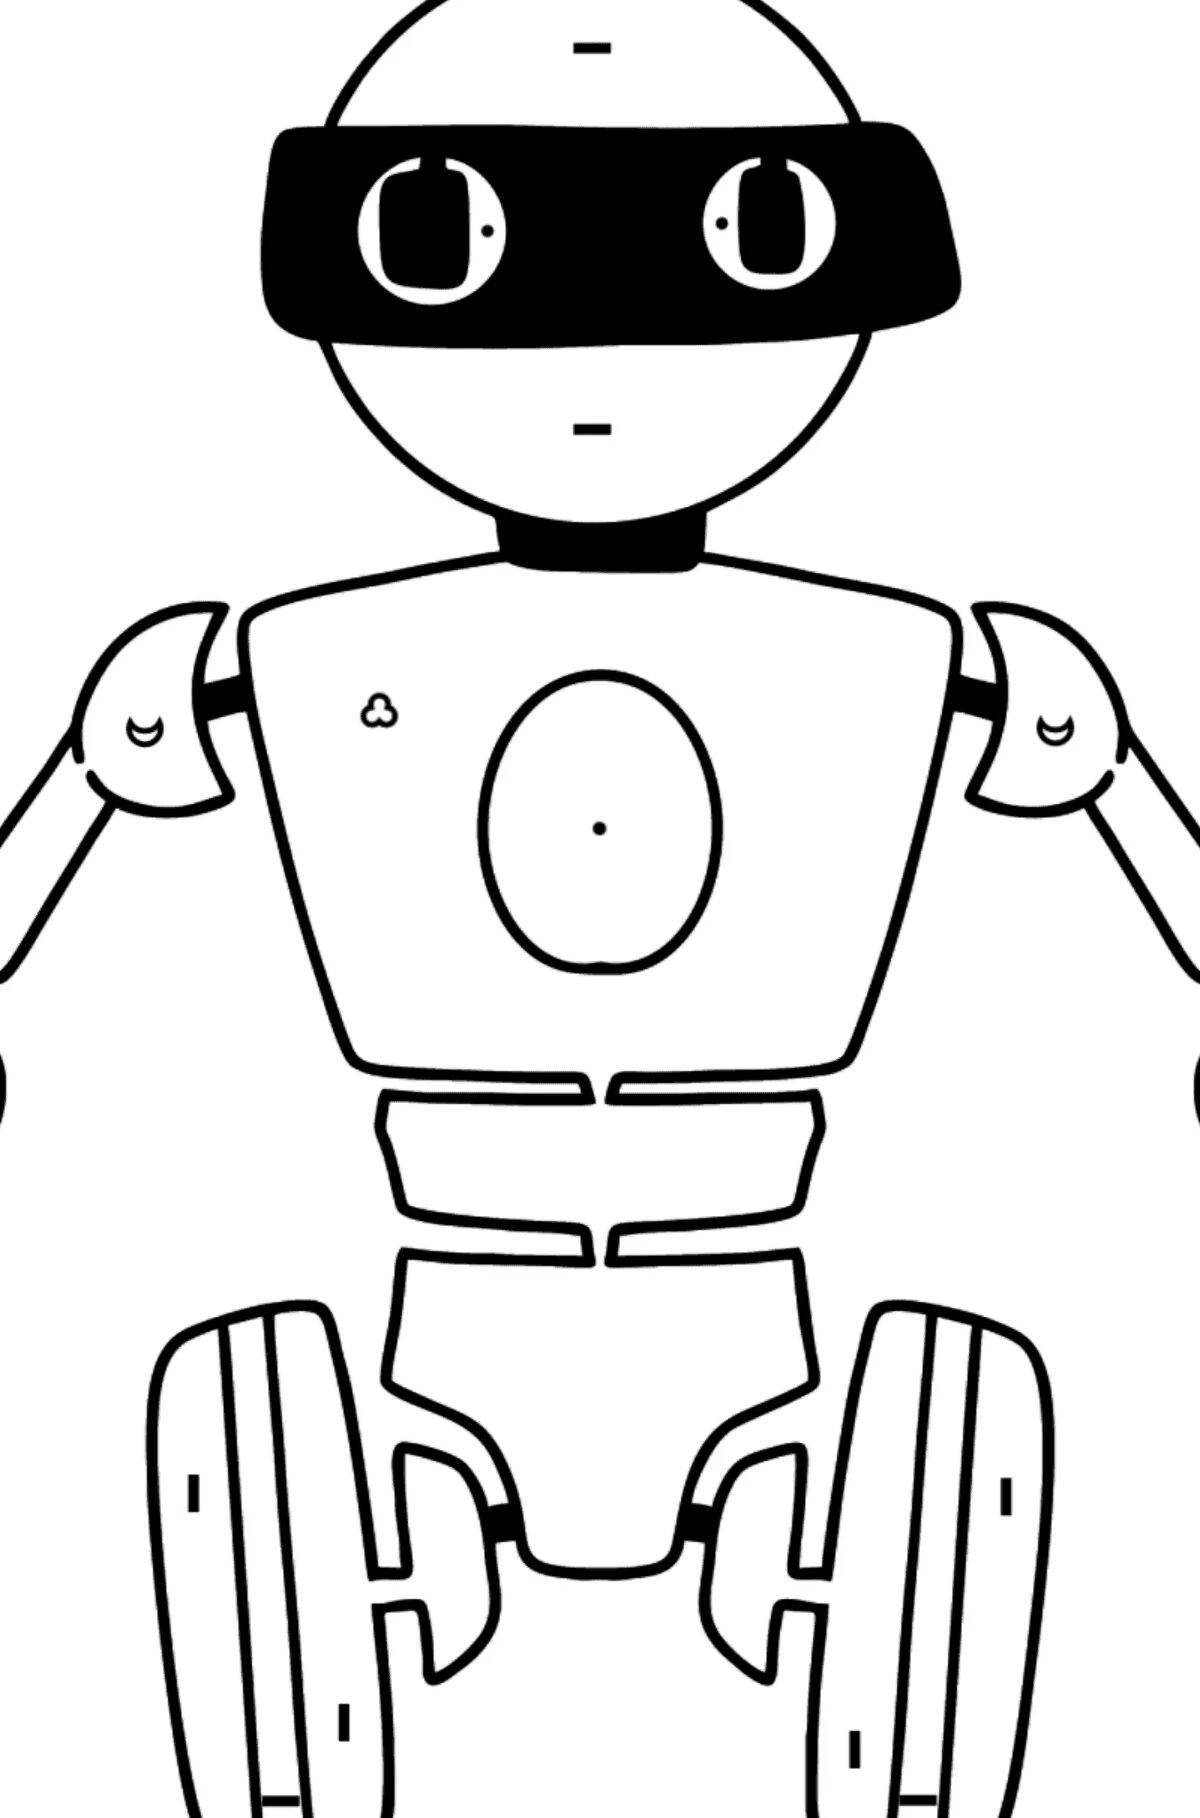 Creative robot coloring by number